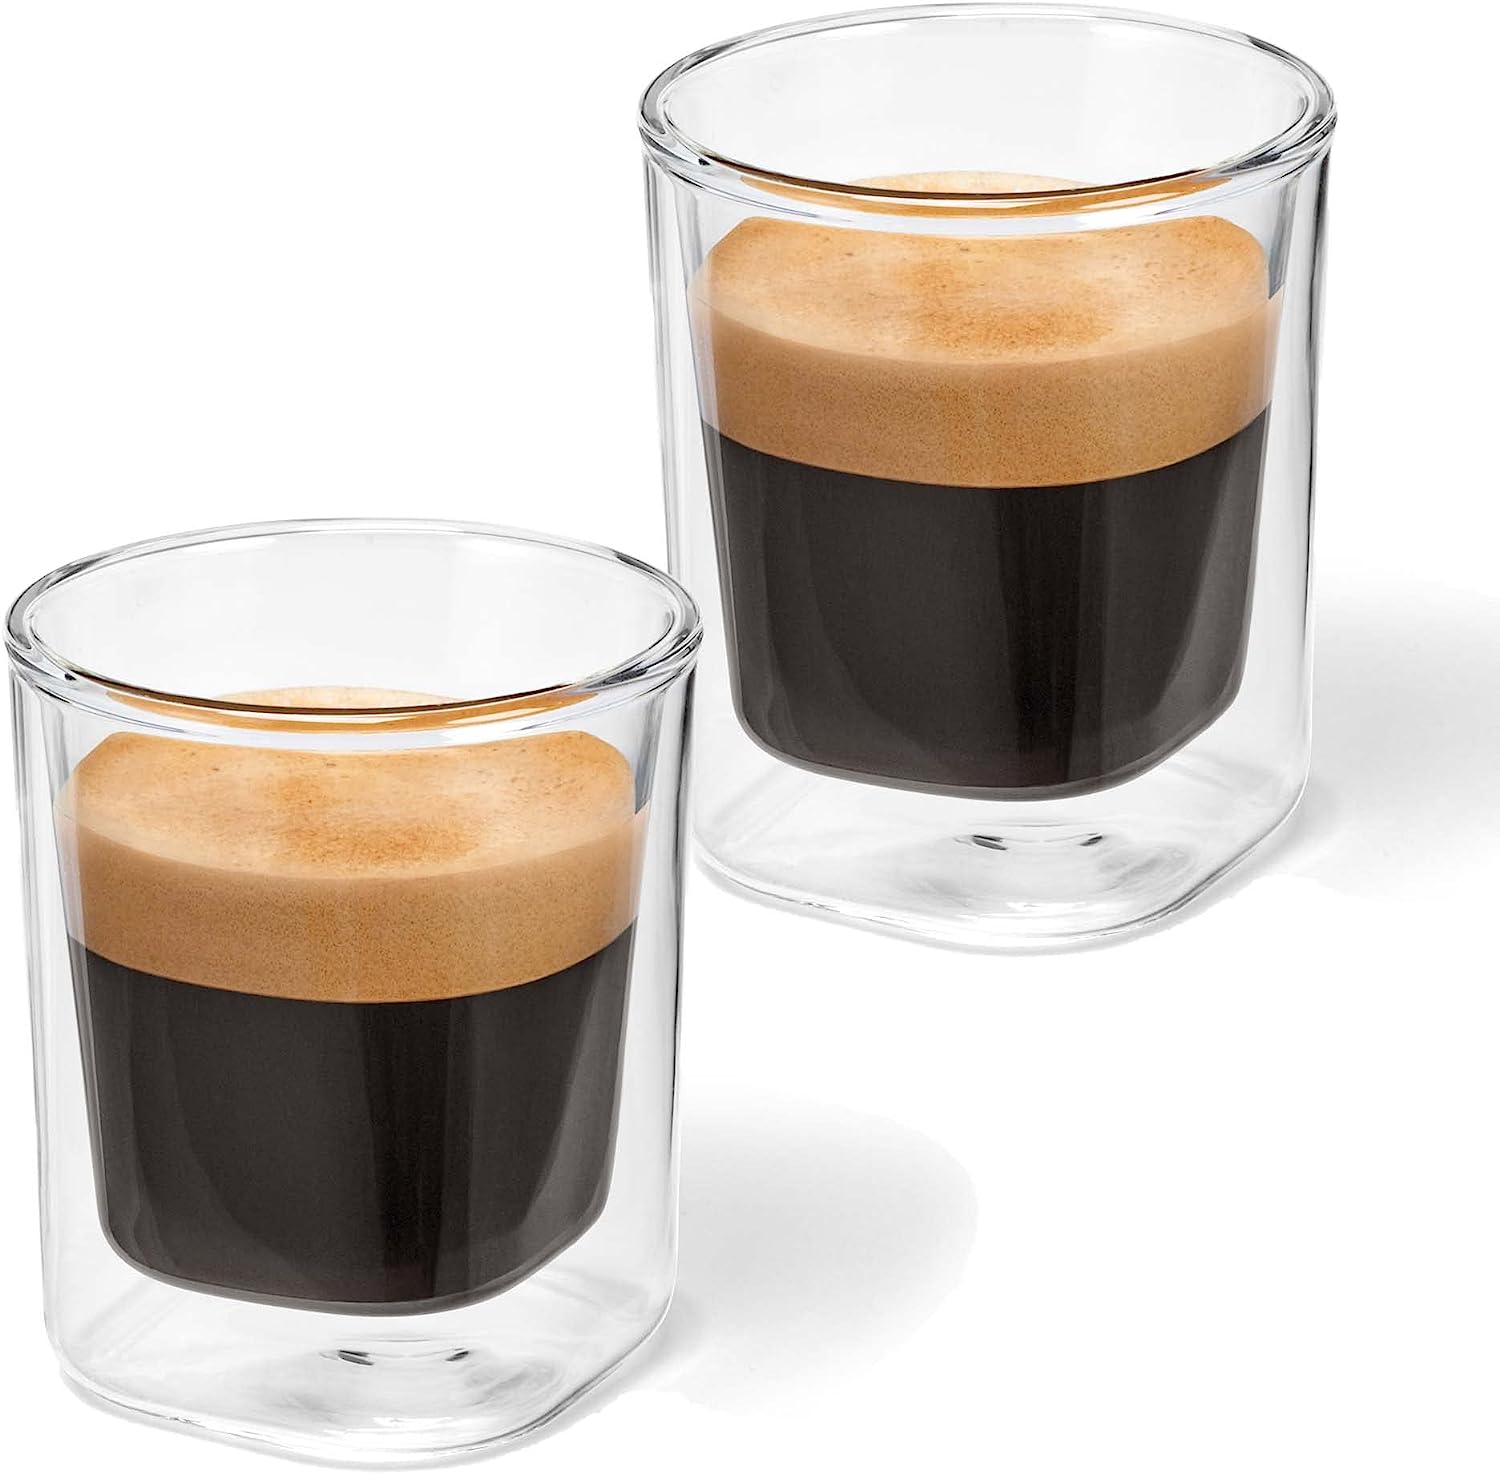 Tchibo QBO 2 Espresso Glasses, High-Quality Glass, Mouth-Blown, Lasered QBO Logo, Enjoy Hot and Cold